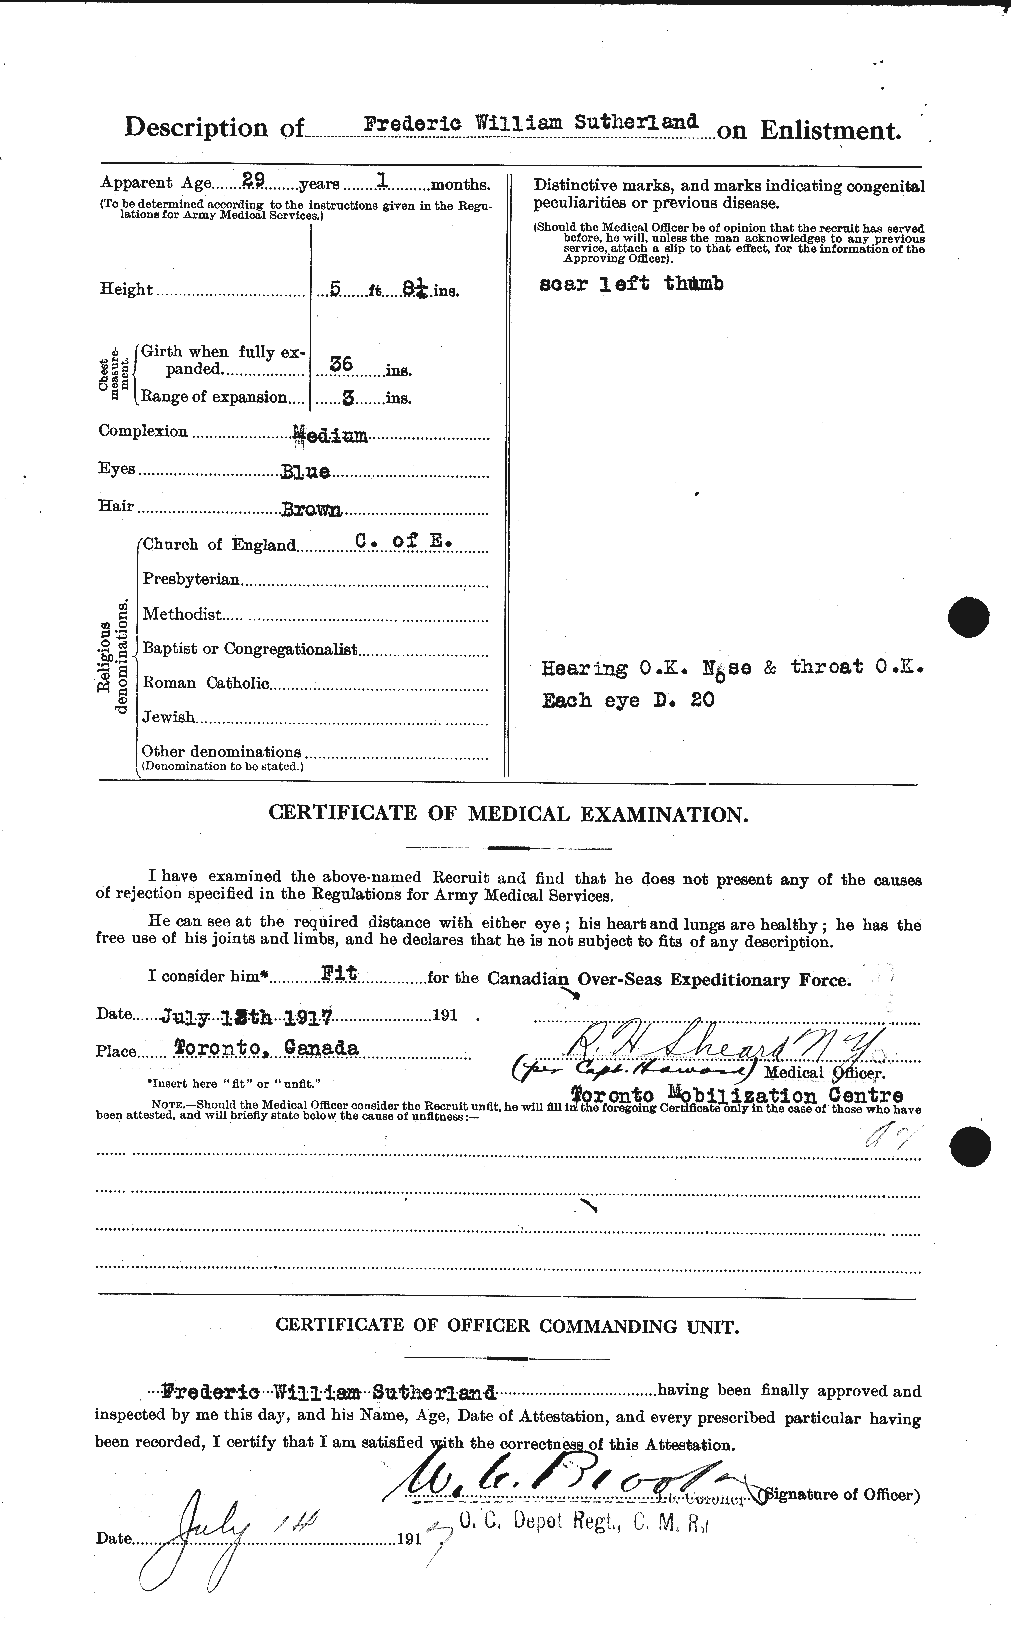 Personnel Records of the First World War - CEF 124869b